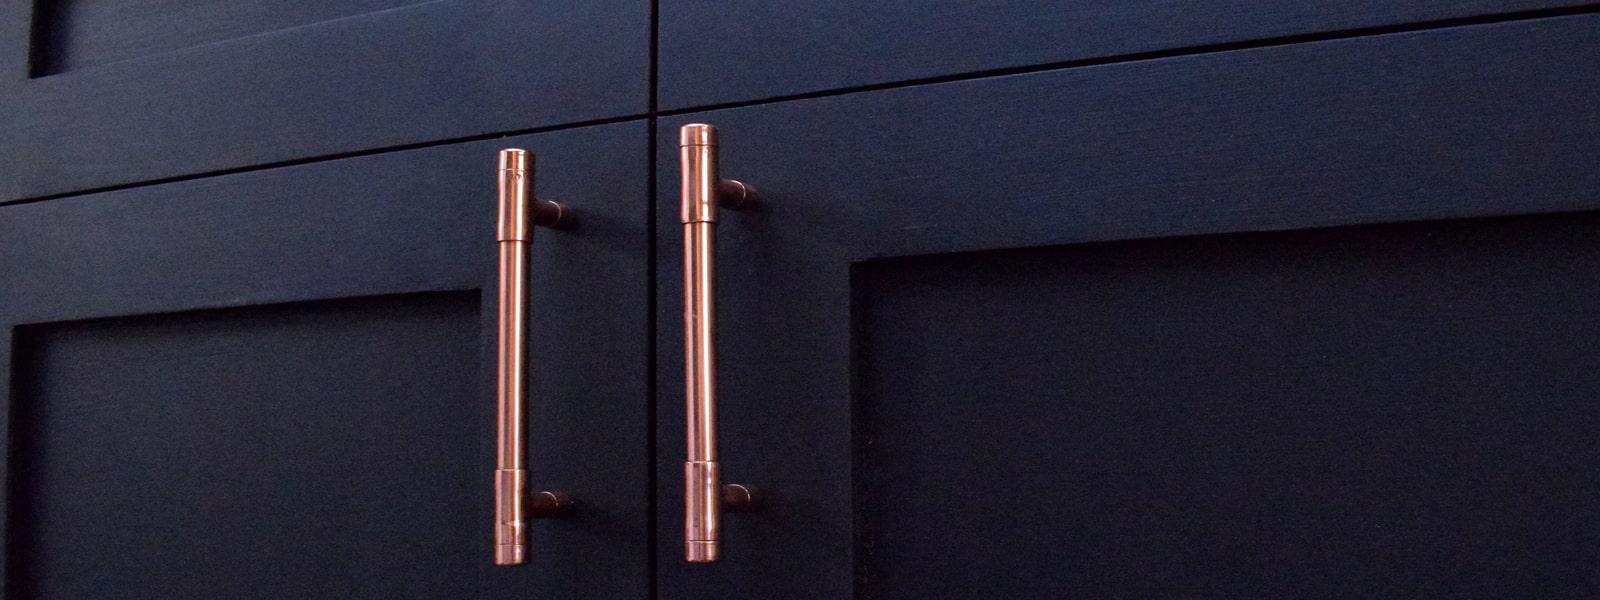 copper handles on cabinets